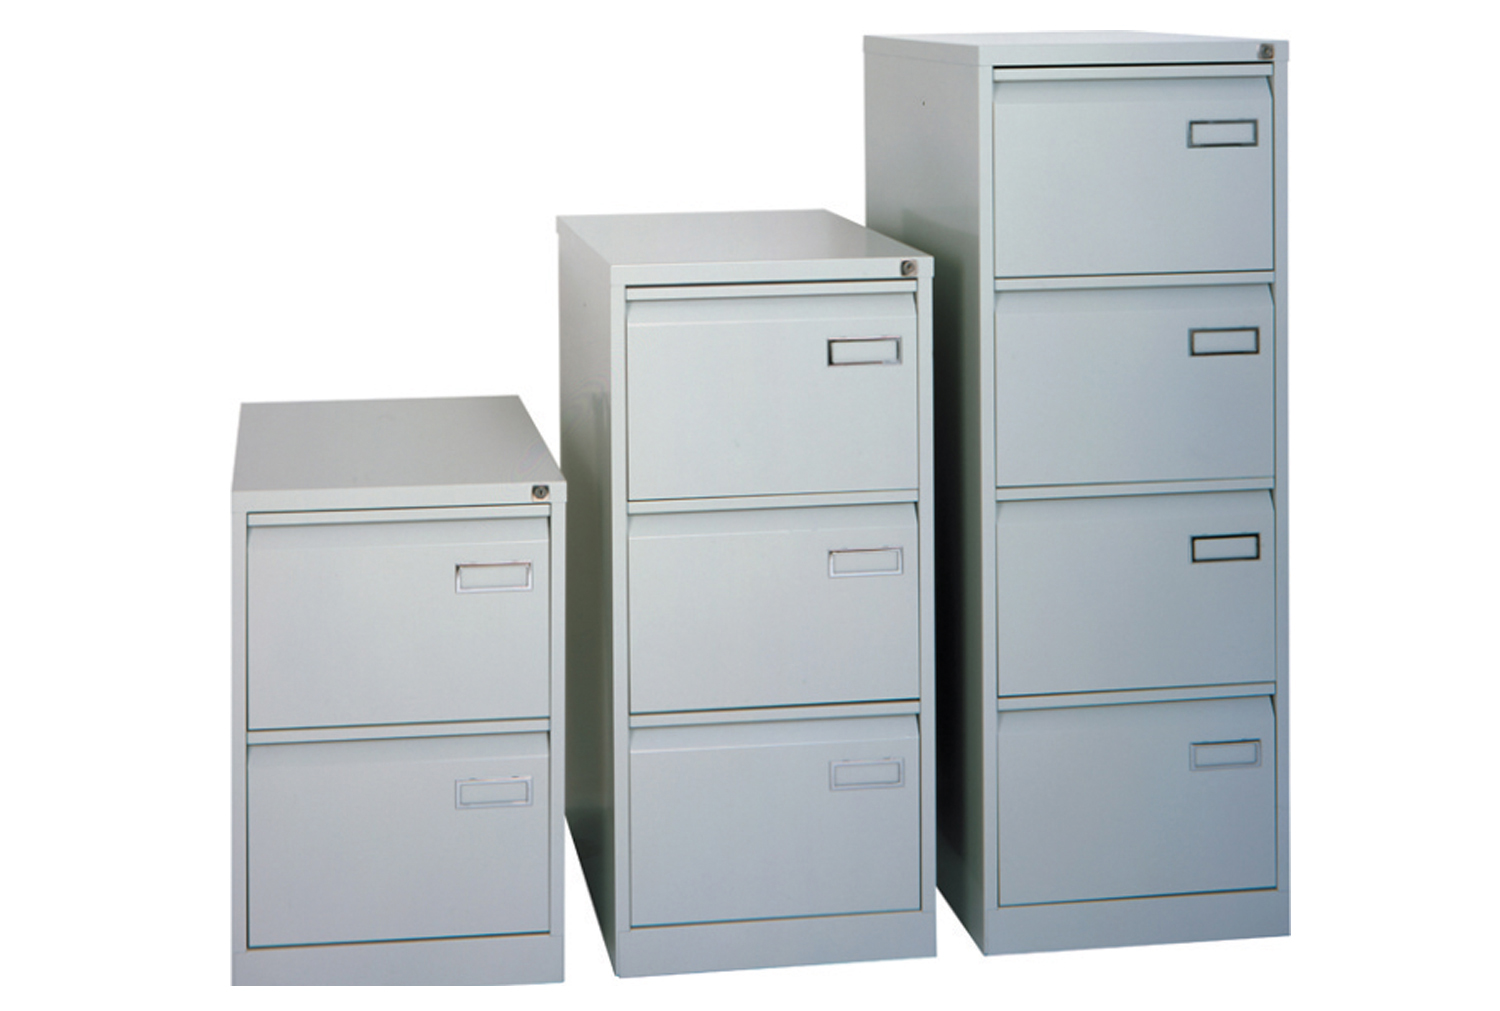 Bisley Executive PSF Filing Cabinet, 4 Drawer - 47wx62dx132h (cm), Silver